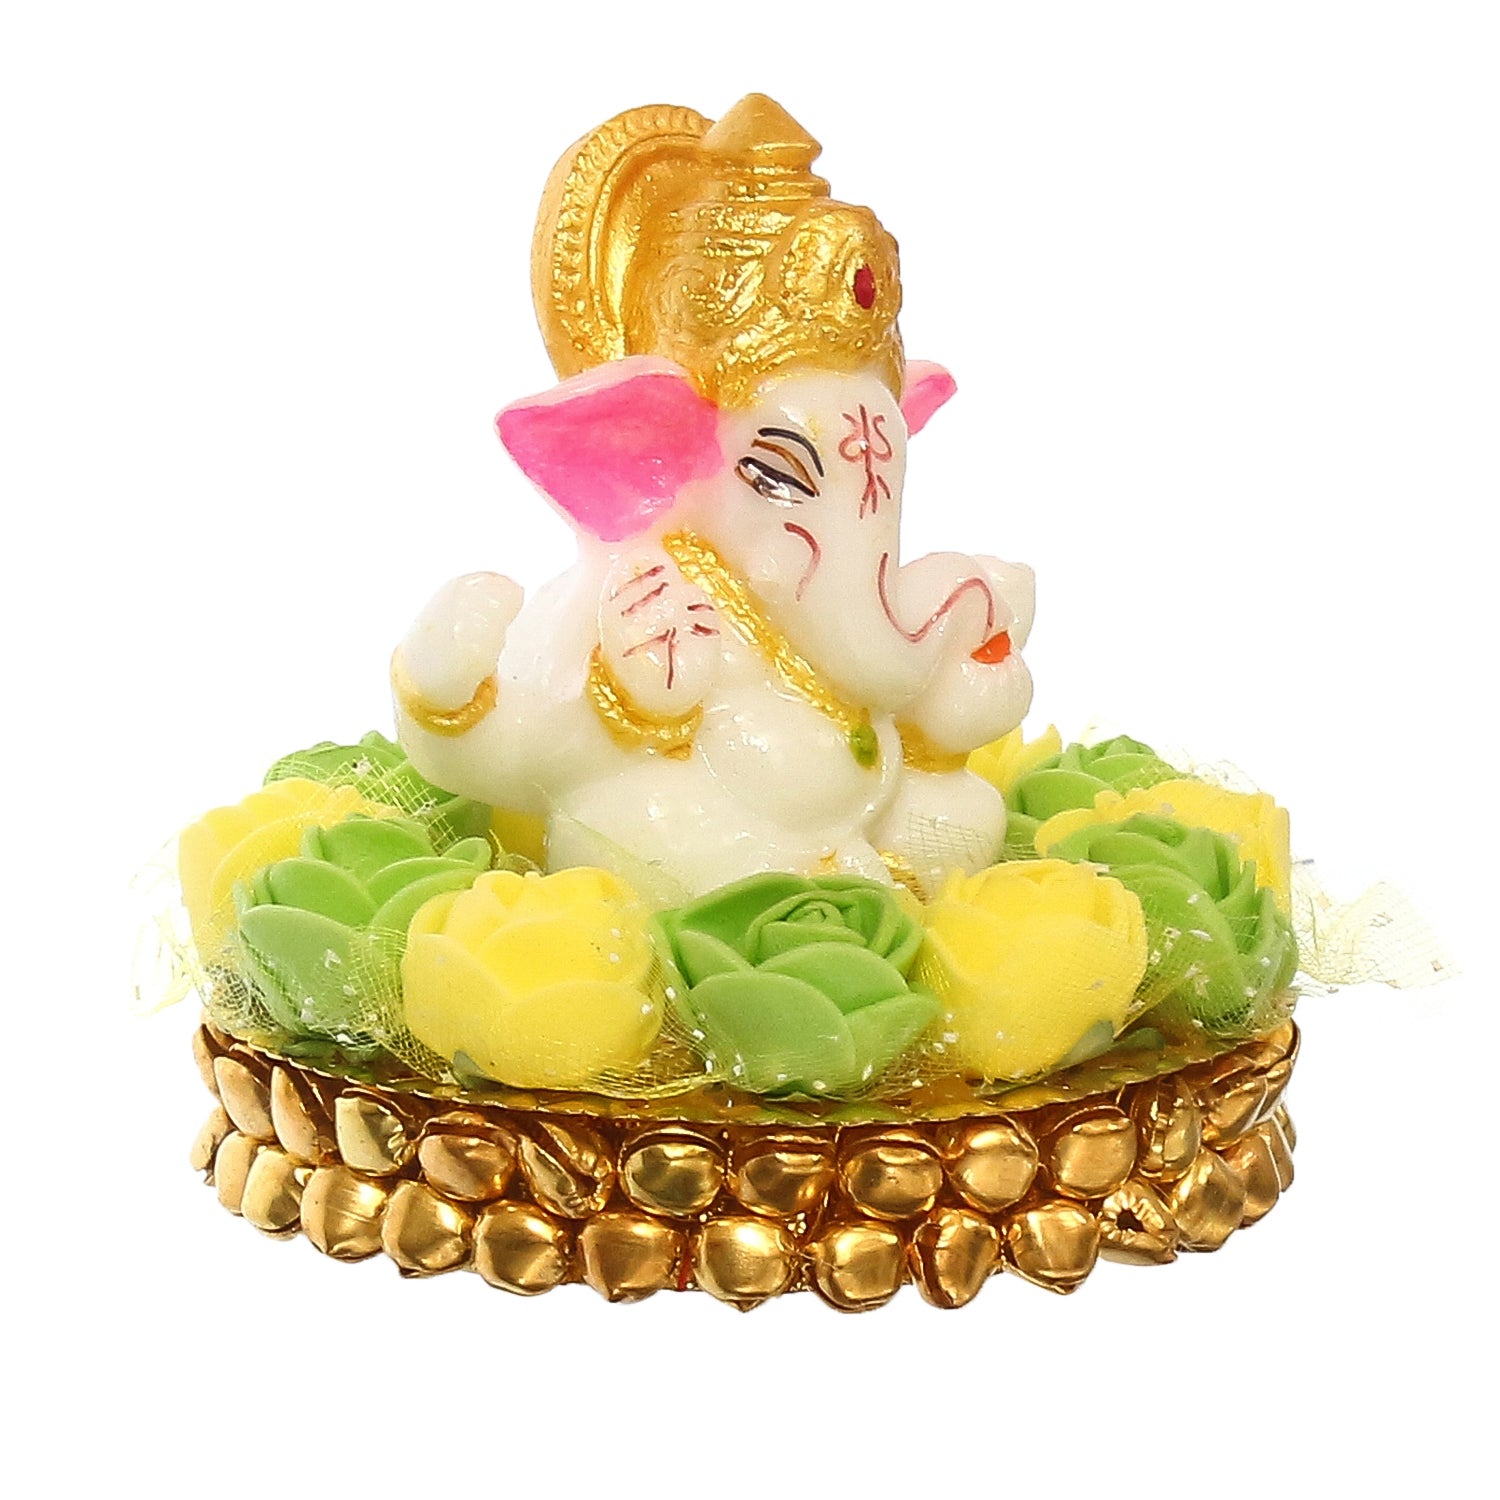 Lord Ganesha Idol On Decorative Handcrafted Green And Yellow Flowers Plate 4